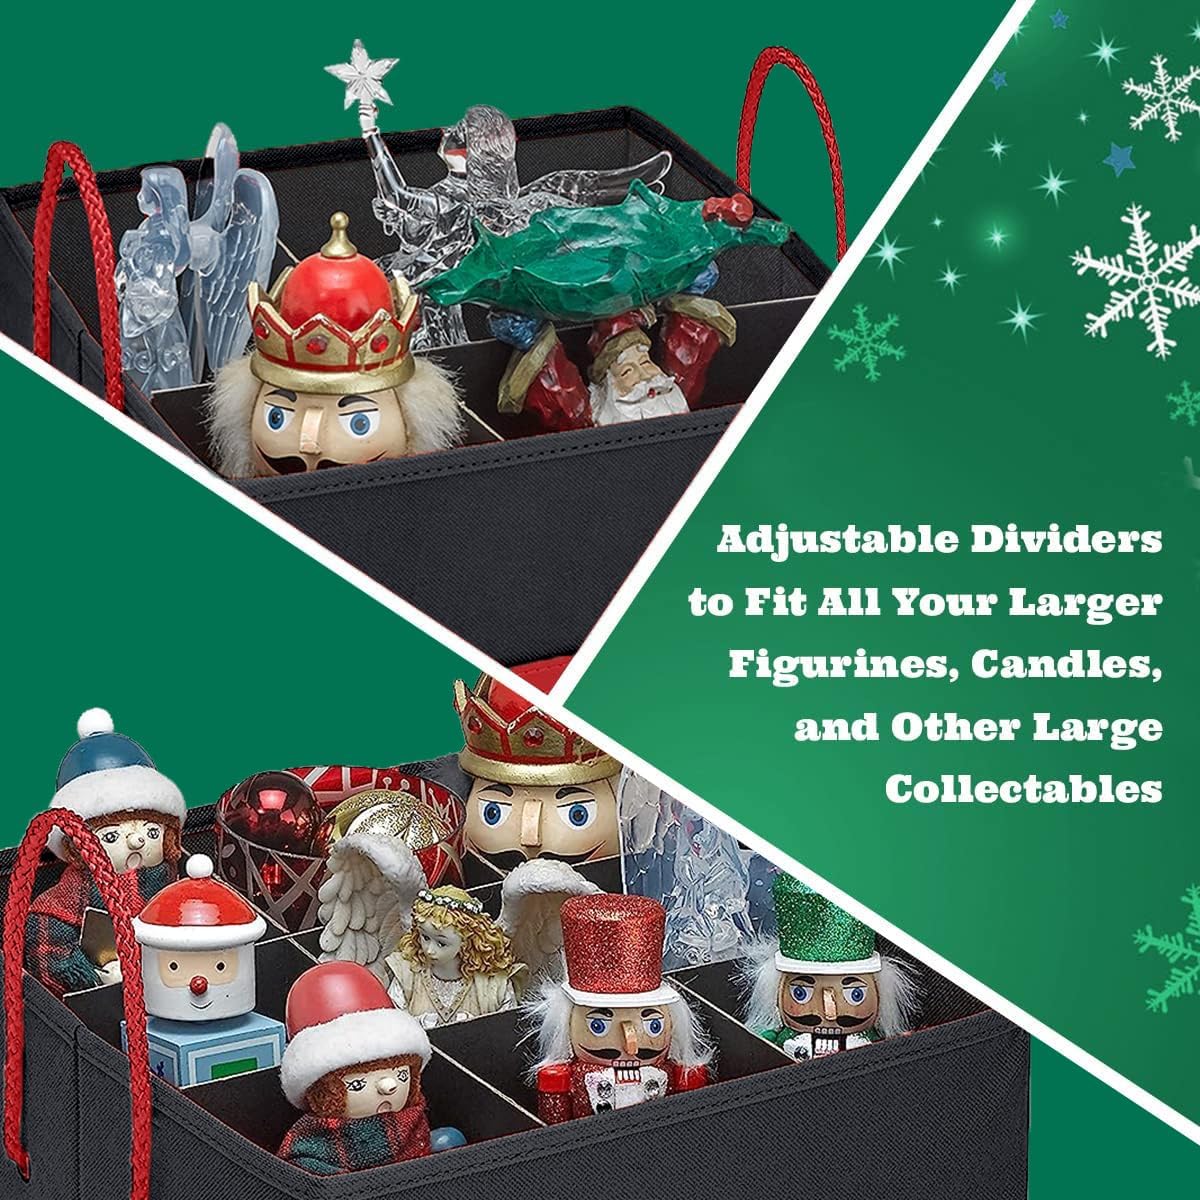 Christmas Nutcracker and Figurine Collectible Storage Box - Stores Up to 9 - 16-inch Tall Nutcrackers, Ornaments, and More - With Adjustable Dividers